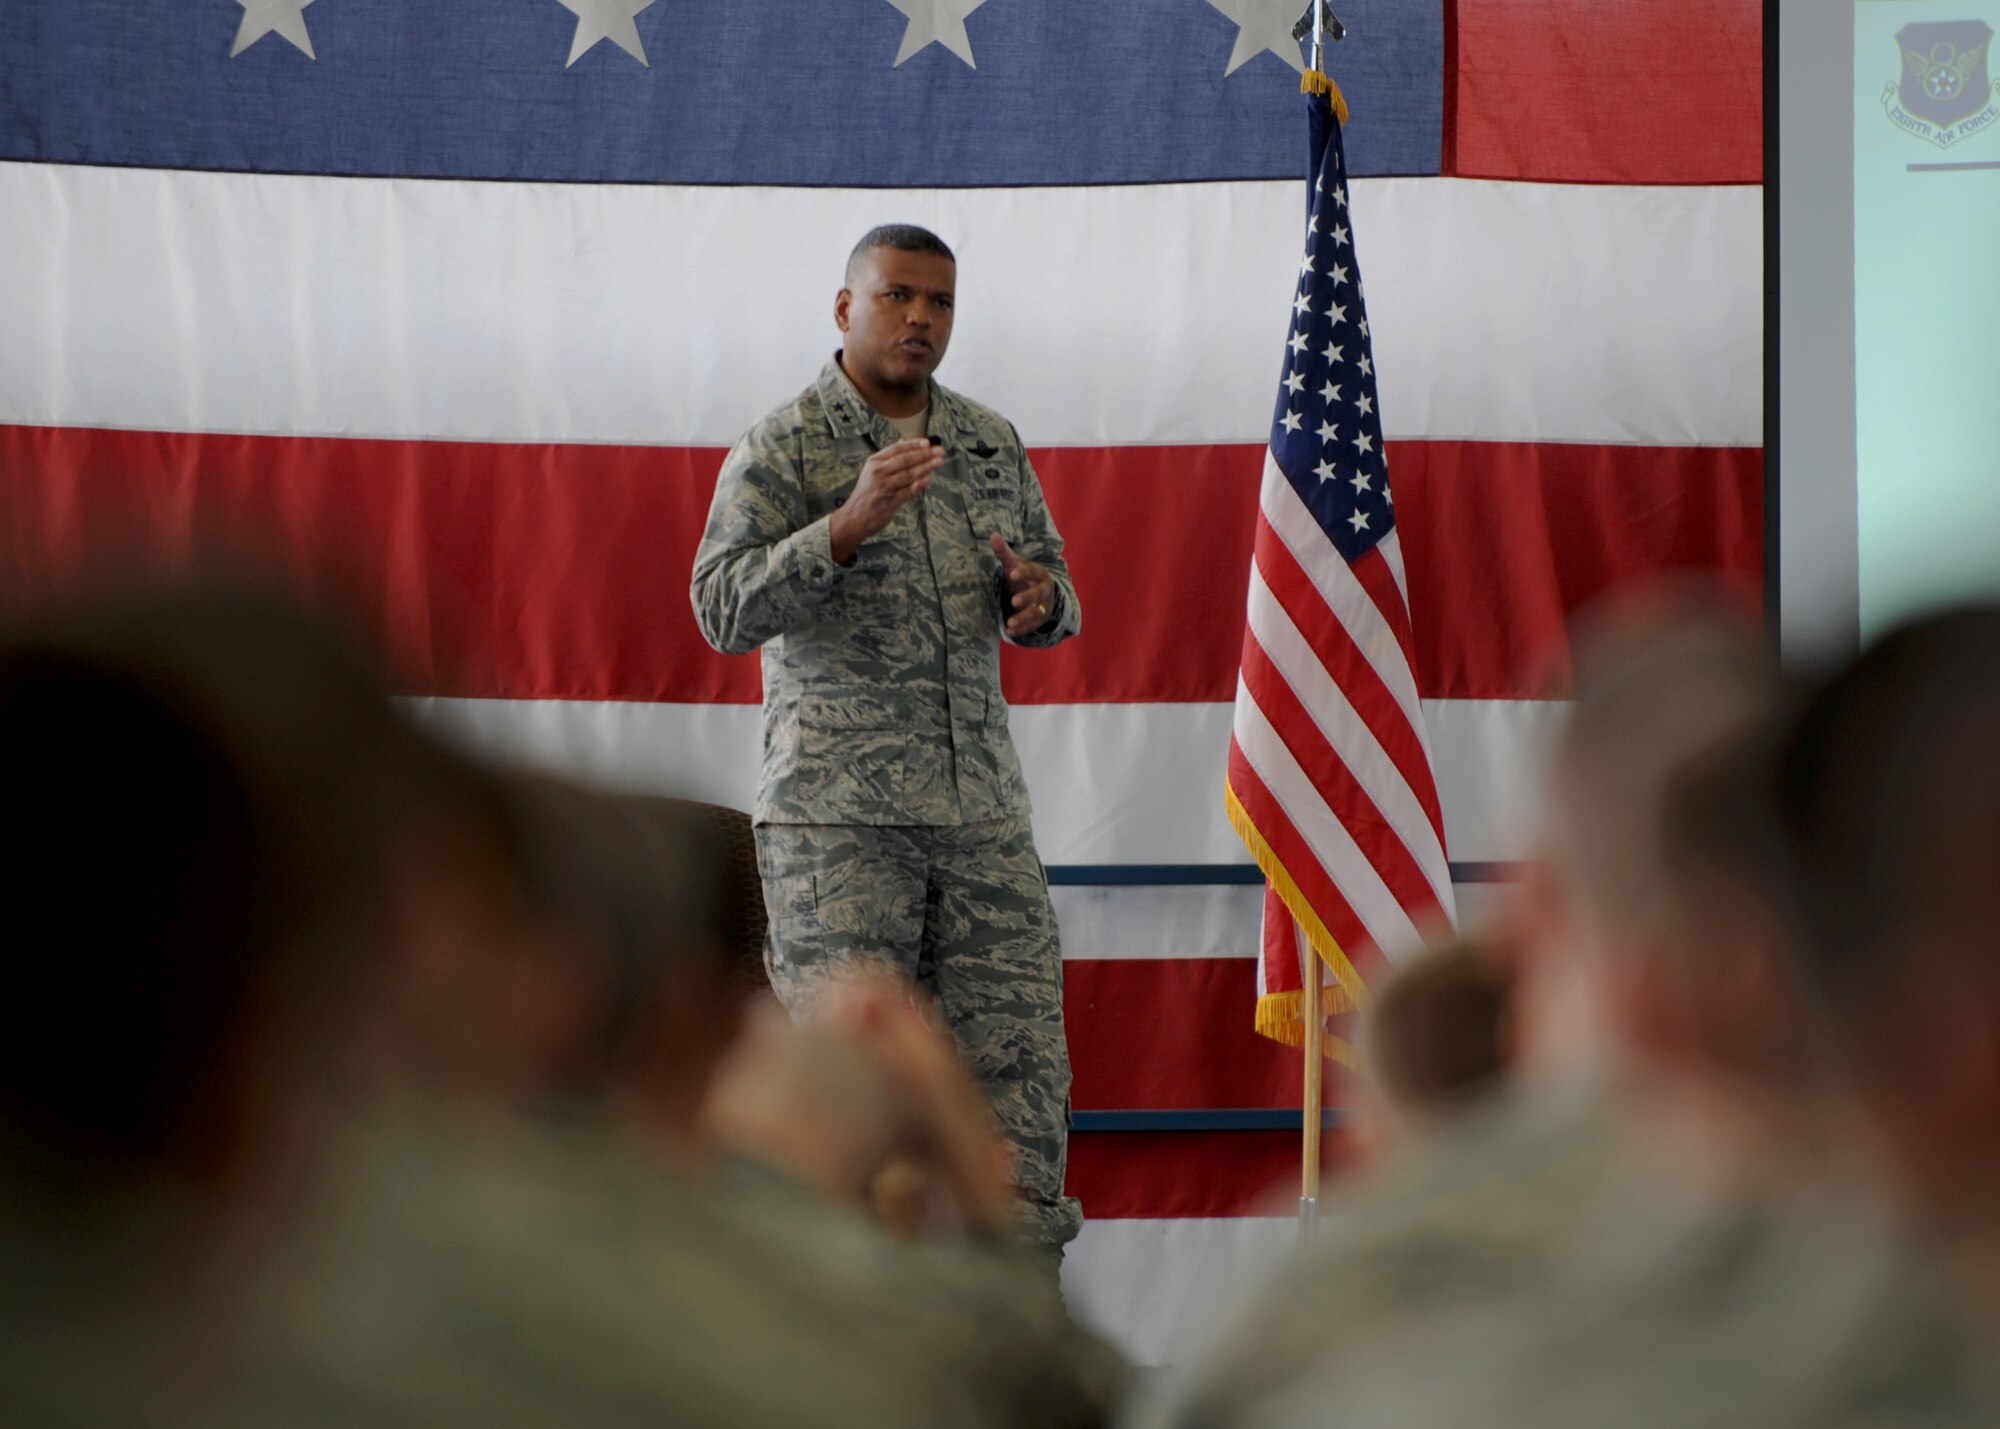 Maj. Gen. Richard Clark, Eighth Air Force commander, addresses bomber Airmen during an all-call at Ellsworth Air Force Base, S.D., Jan. 20, 2016. To close the all-call, Clark showed a motivational video, reminding Airmen to stay committed to the Air Force core value of excellence in all we do and to their mission. (U.S. Air Force photo by Airman 1st Class Denise M. Nevins/Released)